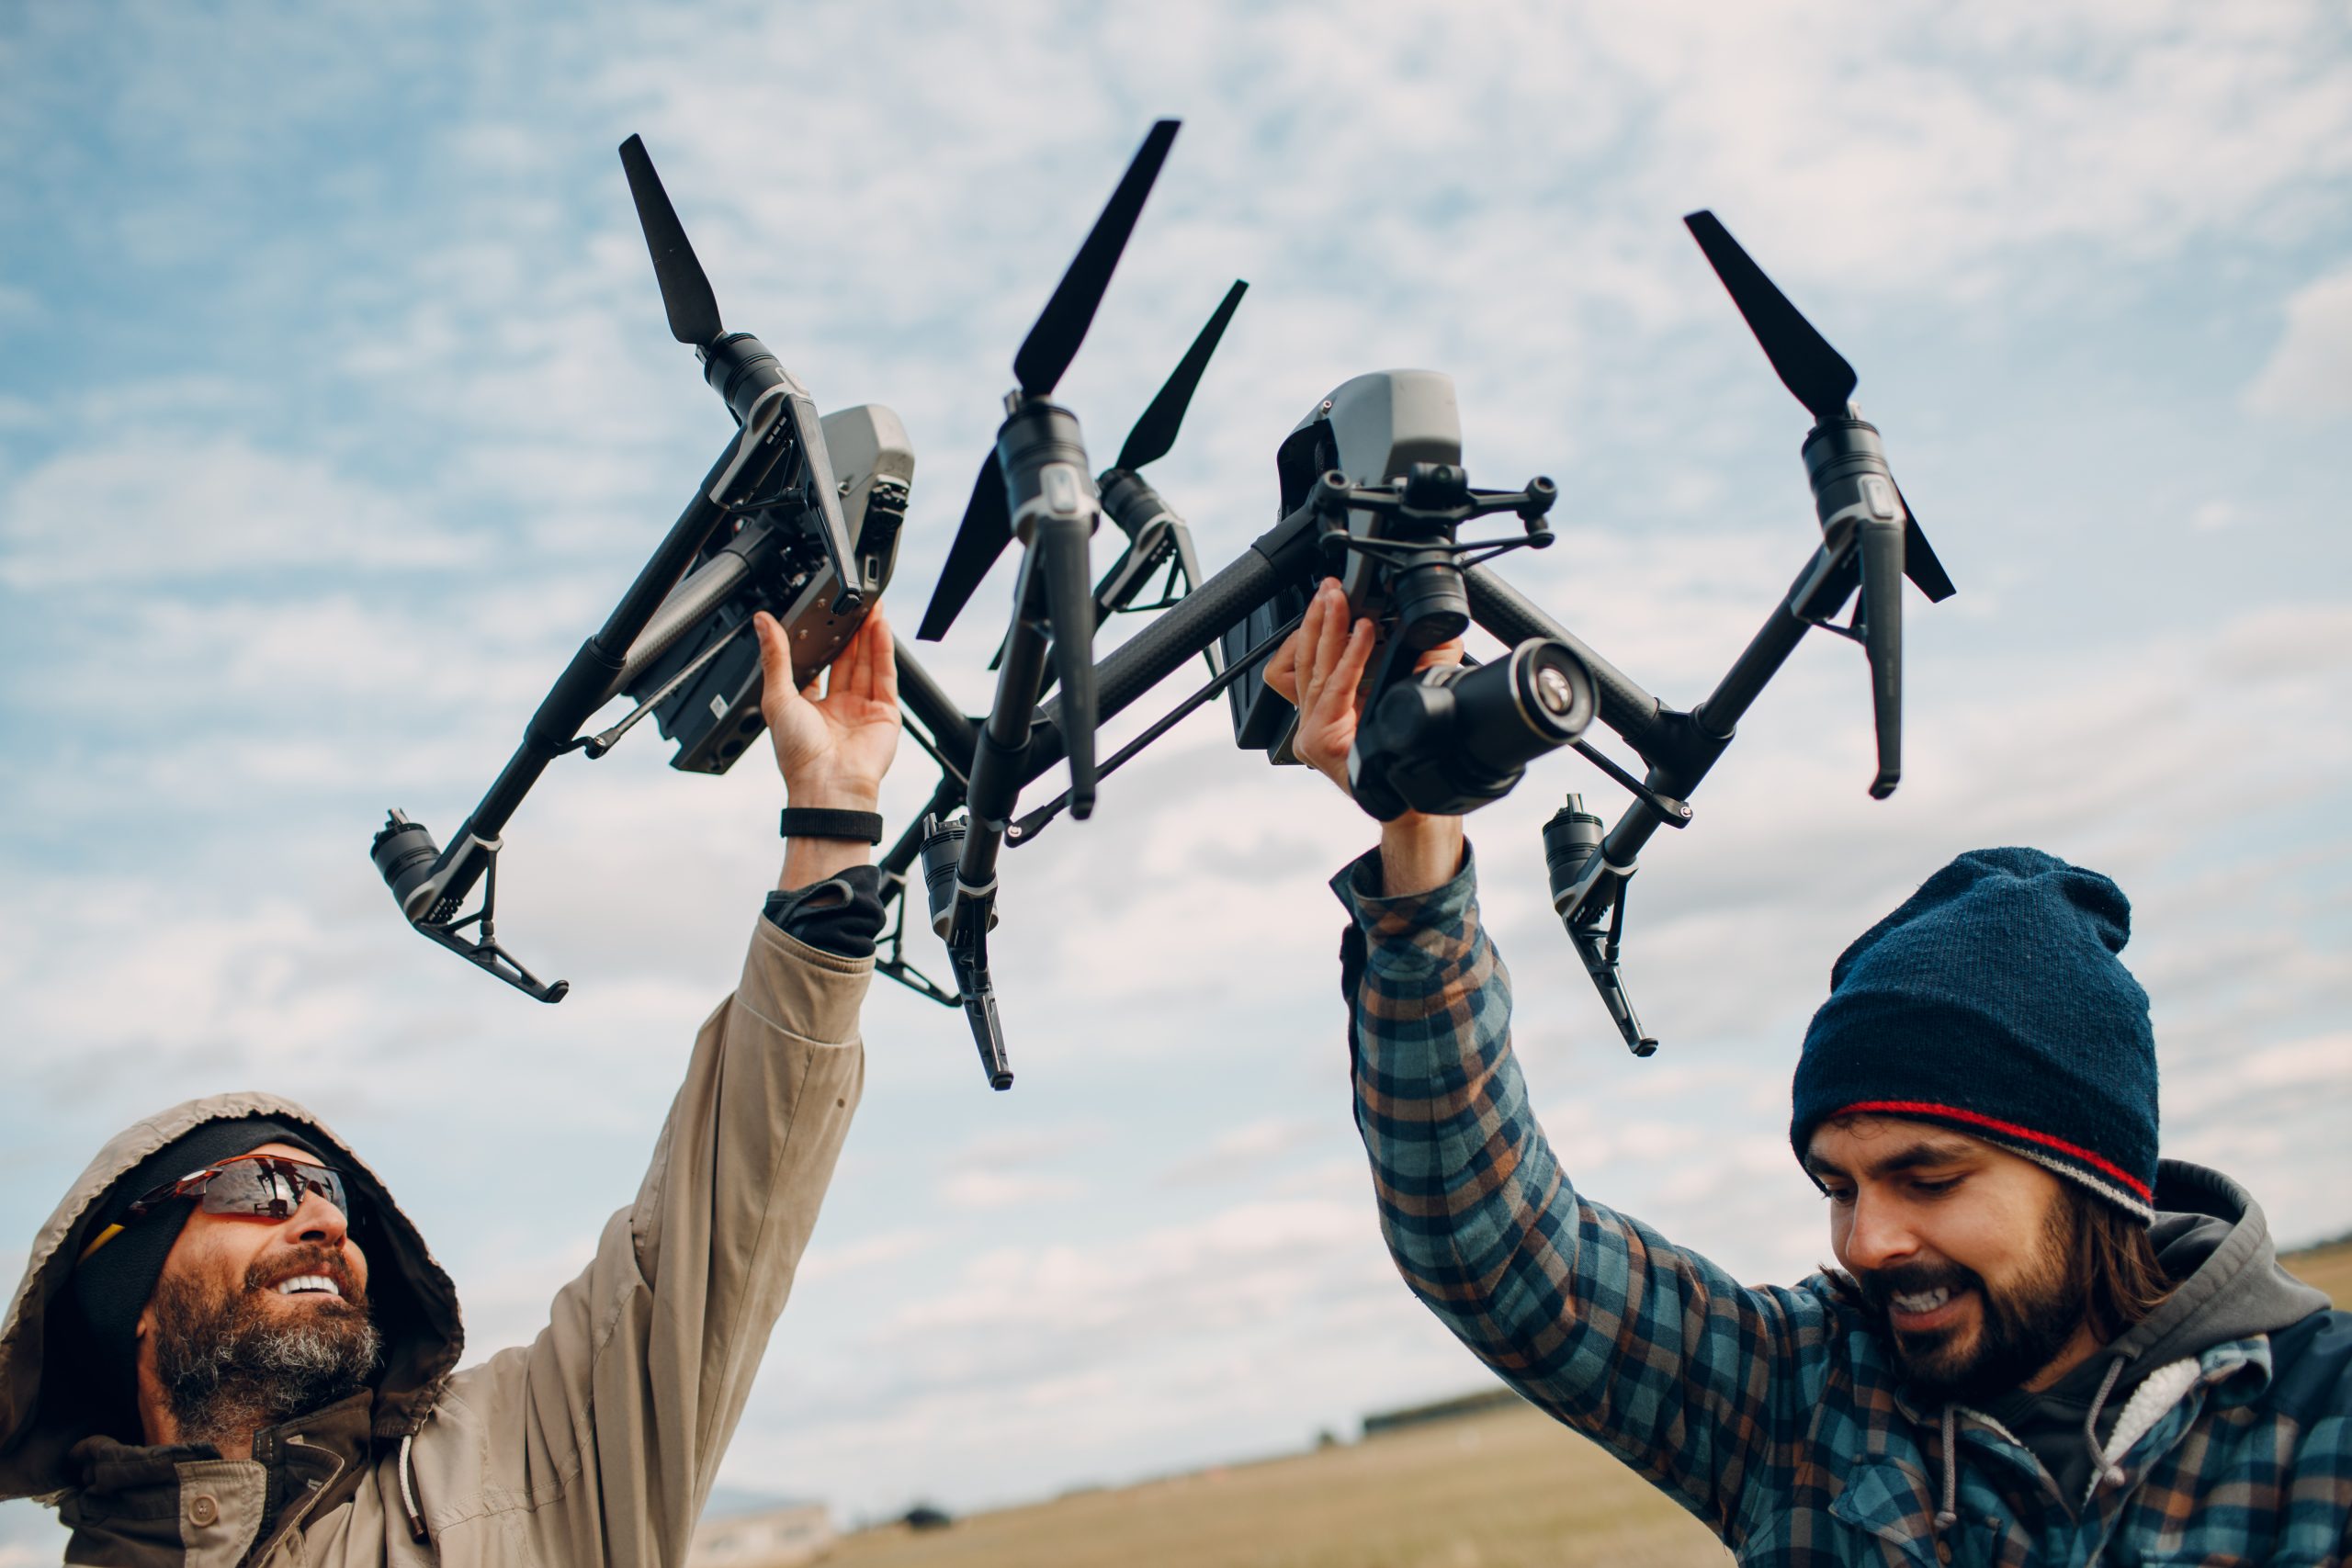 Two Men Pilots Holding Quadcopter Drone Hands Outside Field Scaled